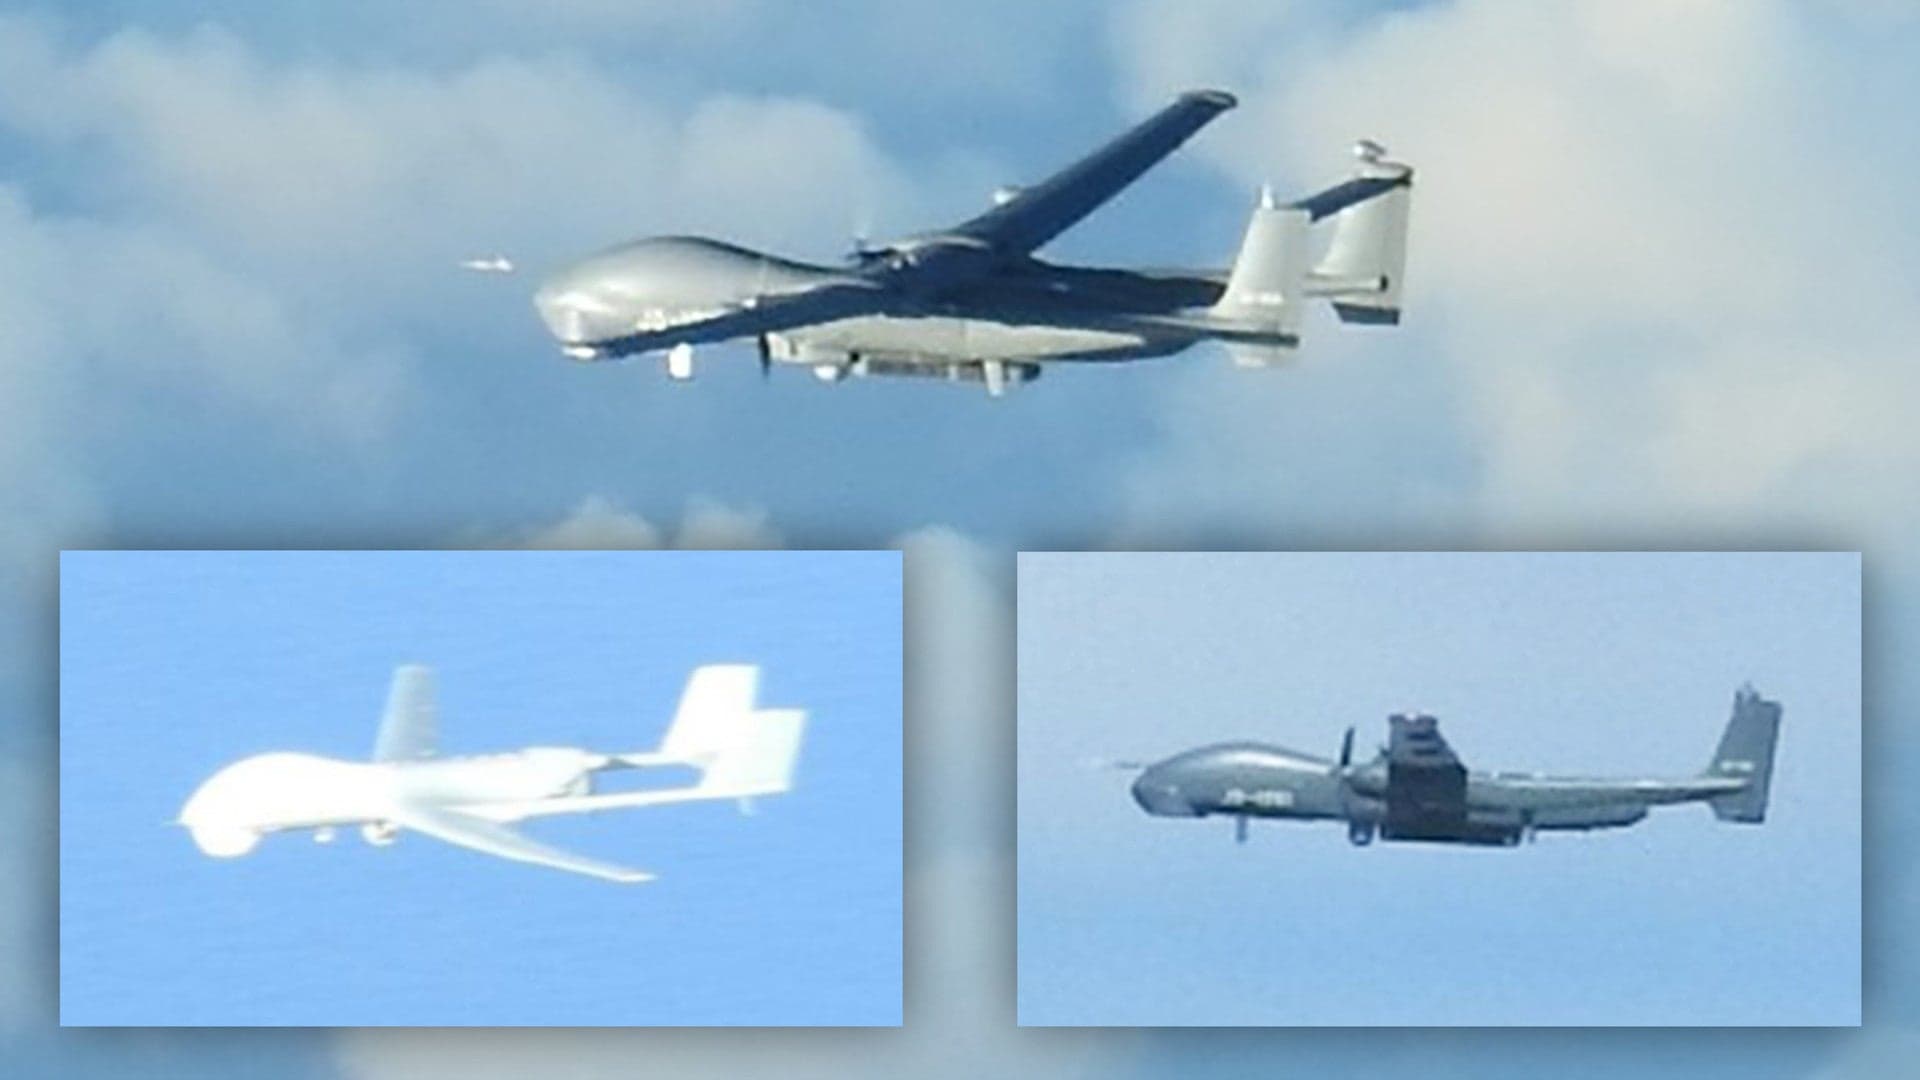 Japanese Fighters Intercept Three Chinese Drones In As Many Days